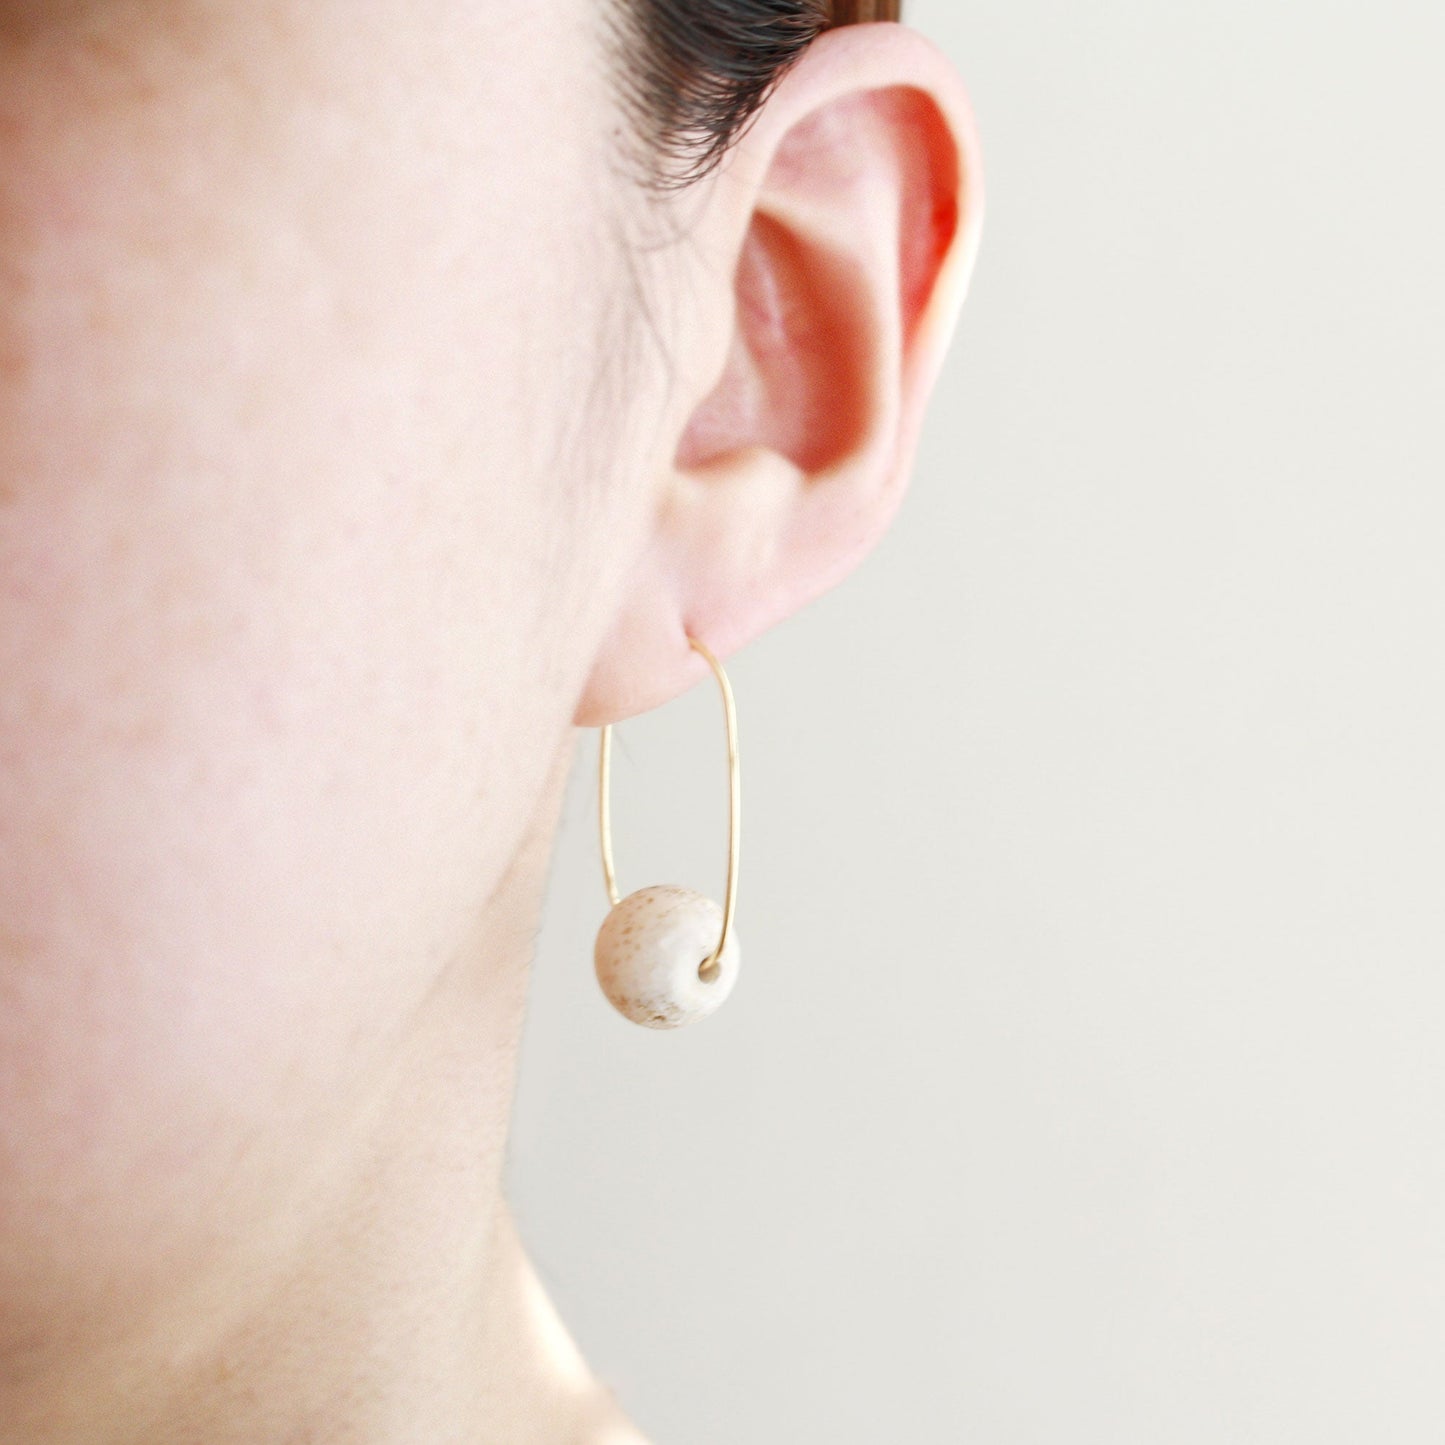 Oval Hoop Earrings with Small Black Balls